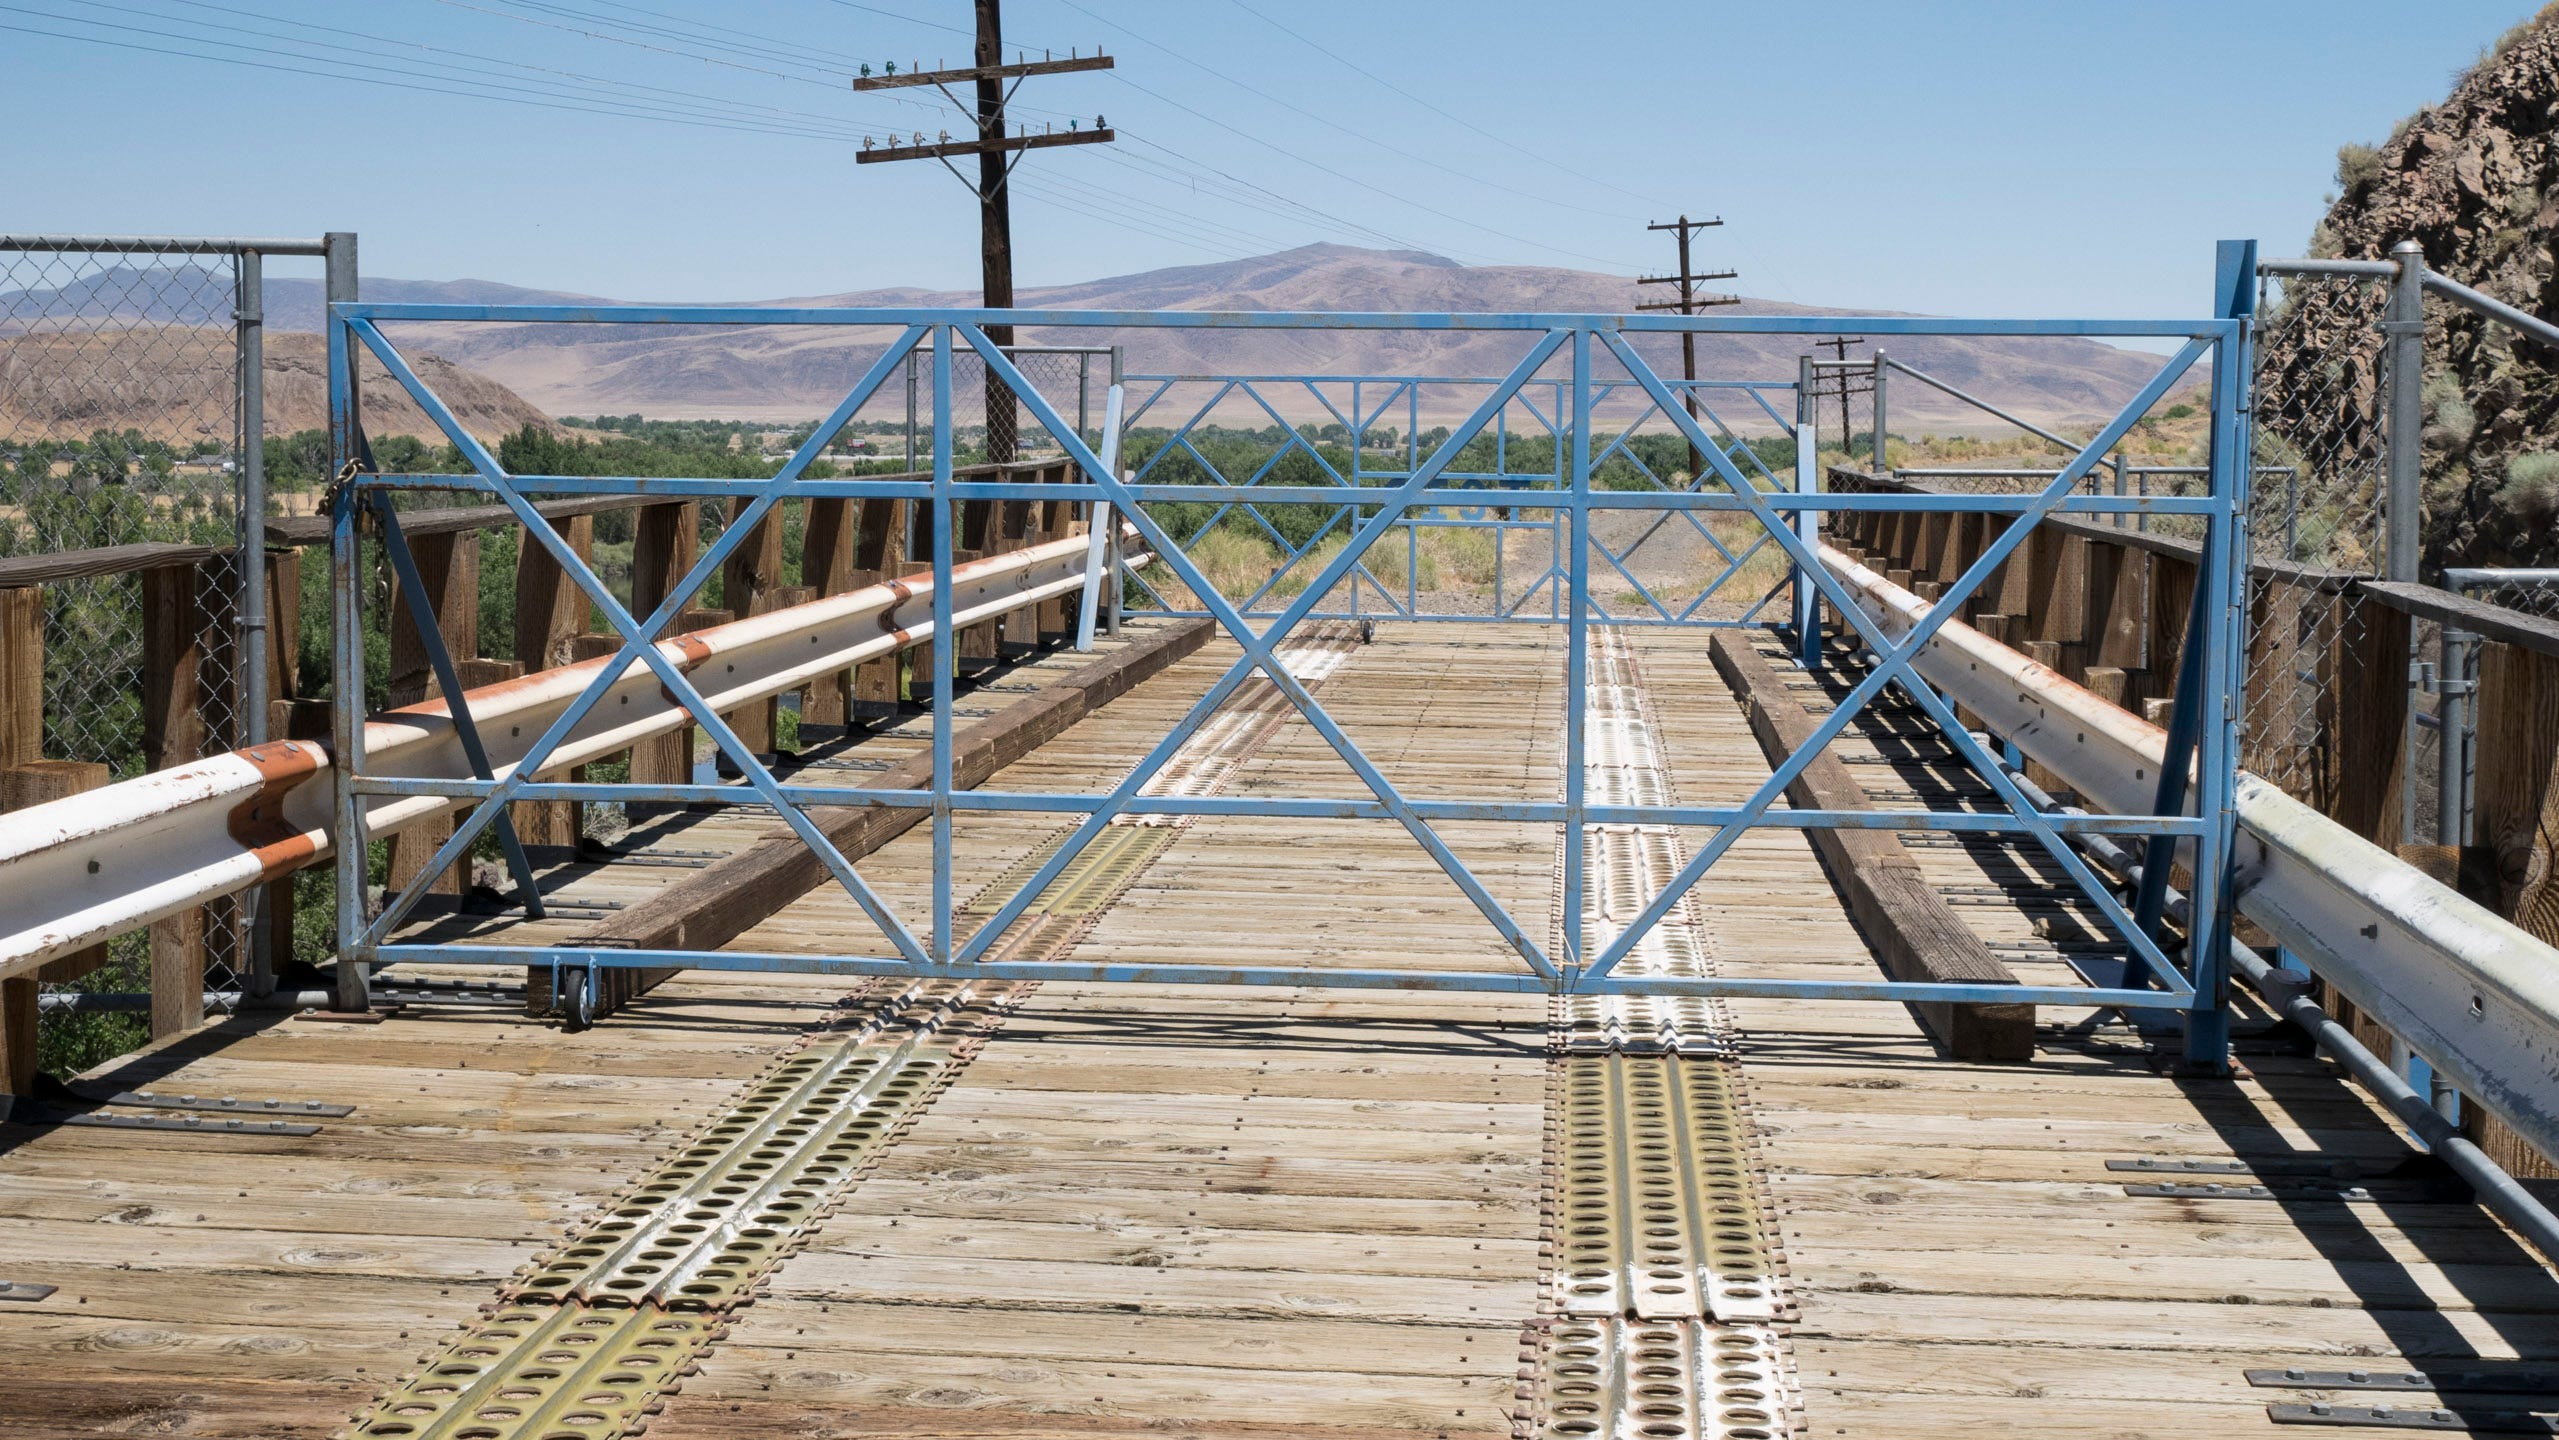 Photo of a wooden-decked bridge with locked gates blocking access. It's a short bridge, with metal tracks where a car or truck's tires are supposed to travel, and white painted guardrails protecting the rusted metal structure of the bridge. About 10 feet from the camera, a metal gate comprised of pieces of blue square tubing laid out in a criss-cross pattern blocks access to the bridge. The gate is hinged on the right; there is a metal chain and lock on the left preventing the gate from swinging open. About 30 feet away from the first gate, a second, identical gate is blocking access. Beyond is low, green scrub brush, a dirt road, and distant, rocky mountains.